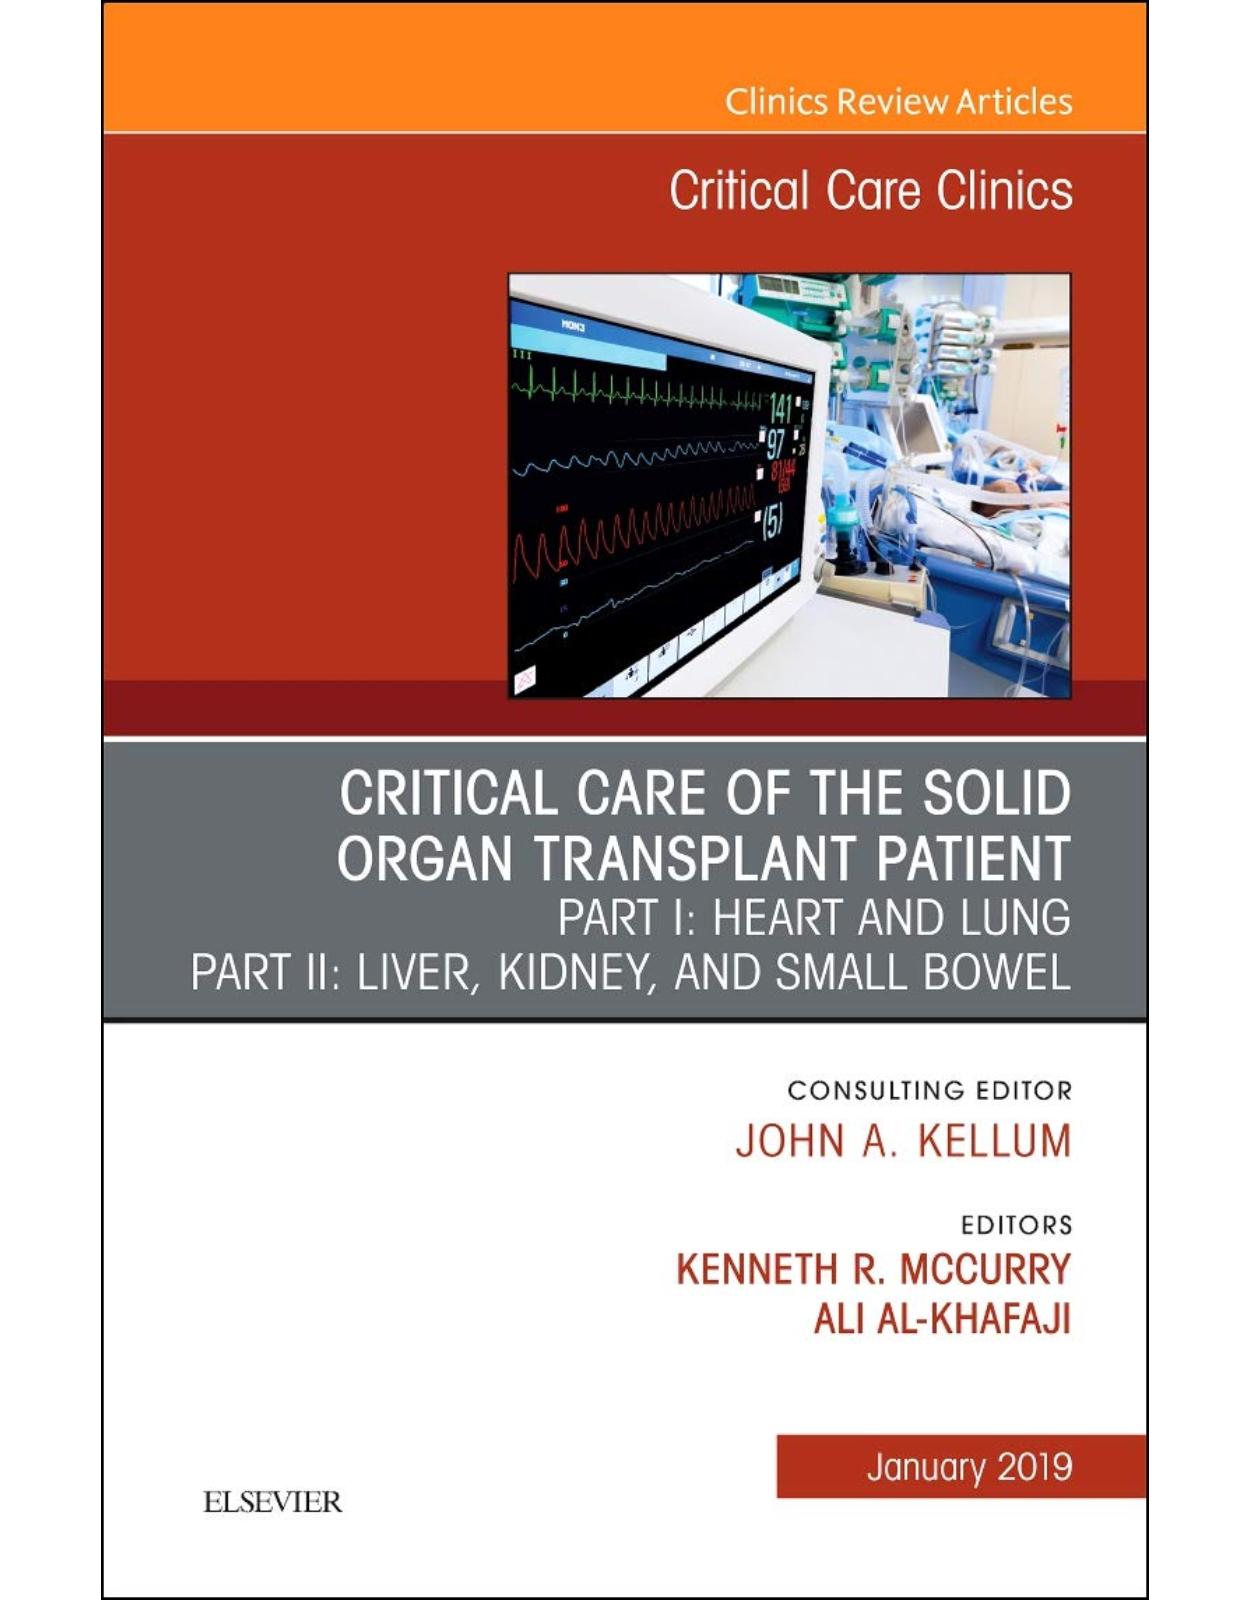 Critical Care of the Solid Organ Transplant Patient, An Issue of Critical Care Clinics, Volume 35-1